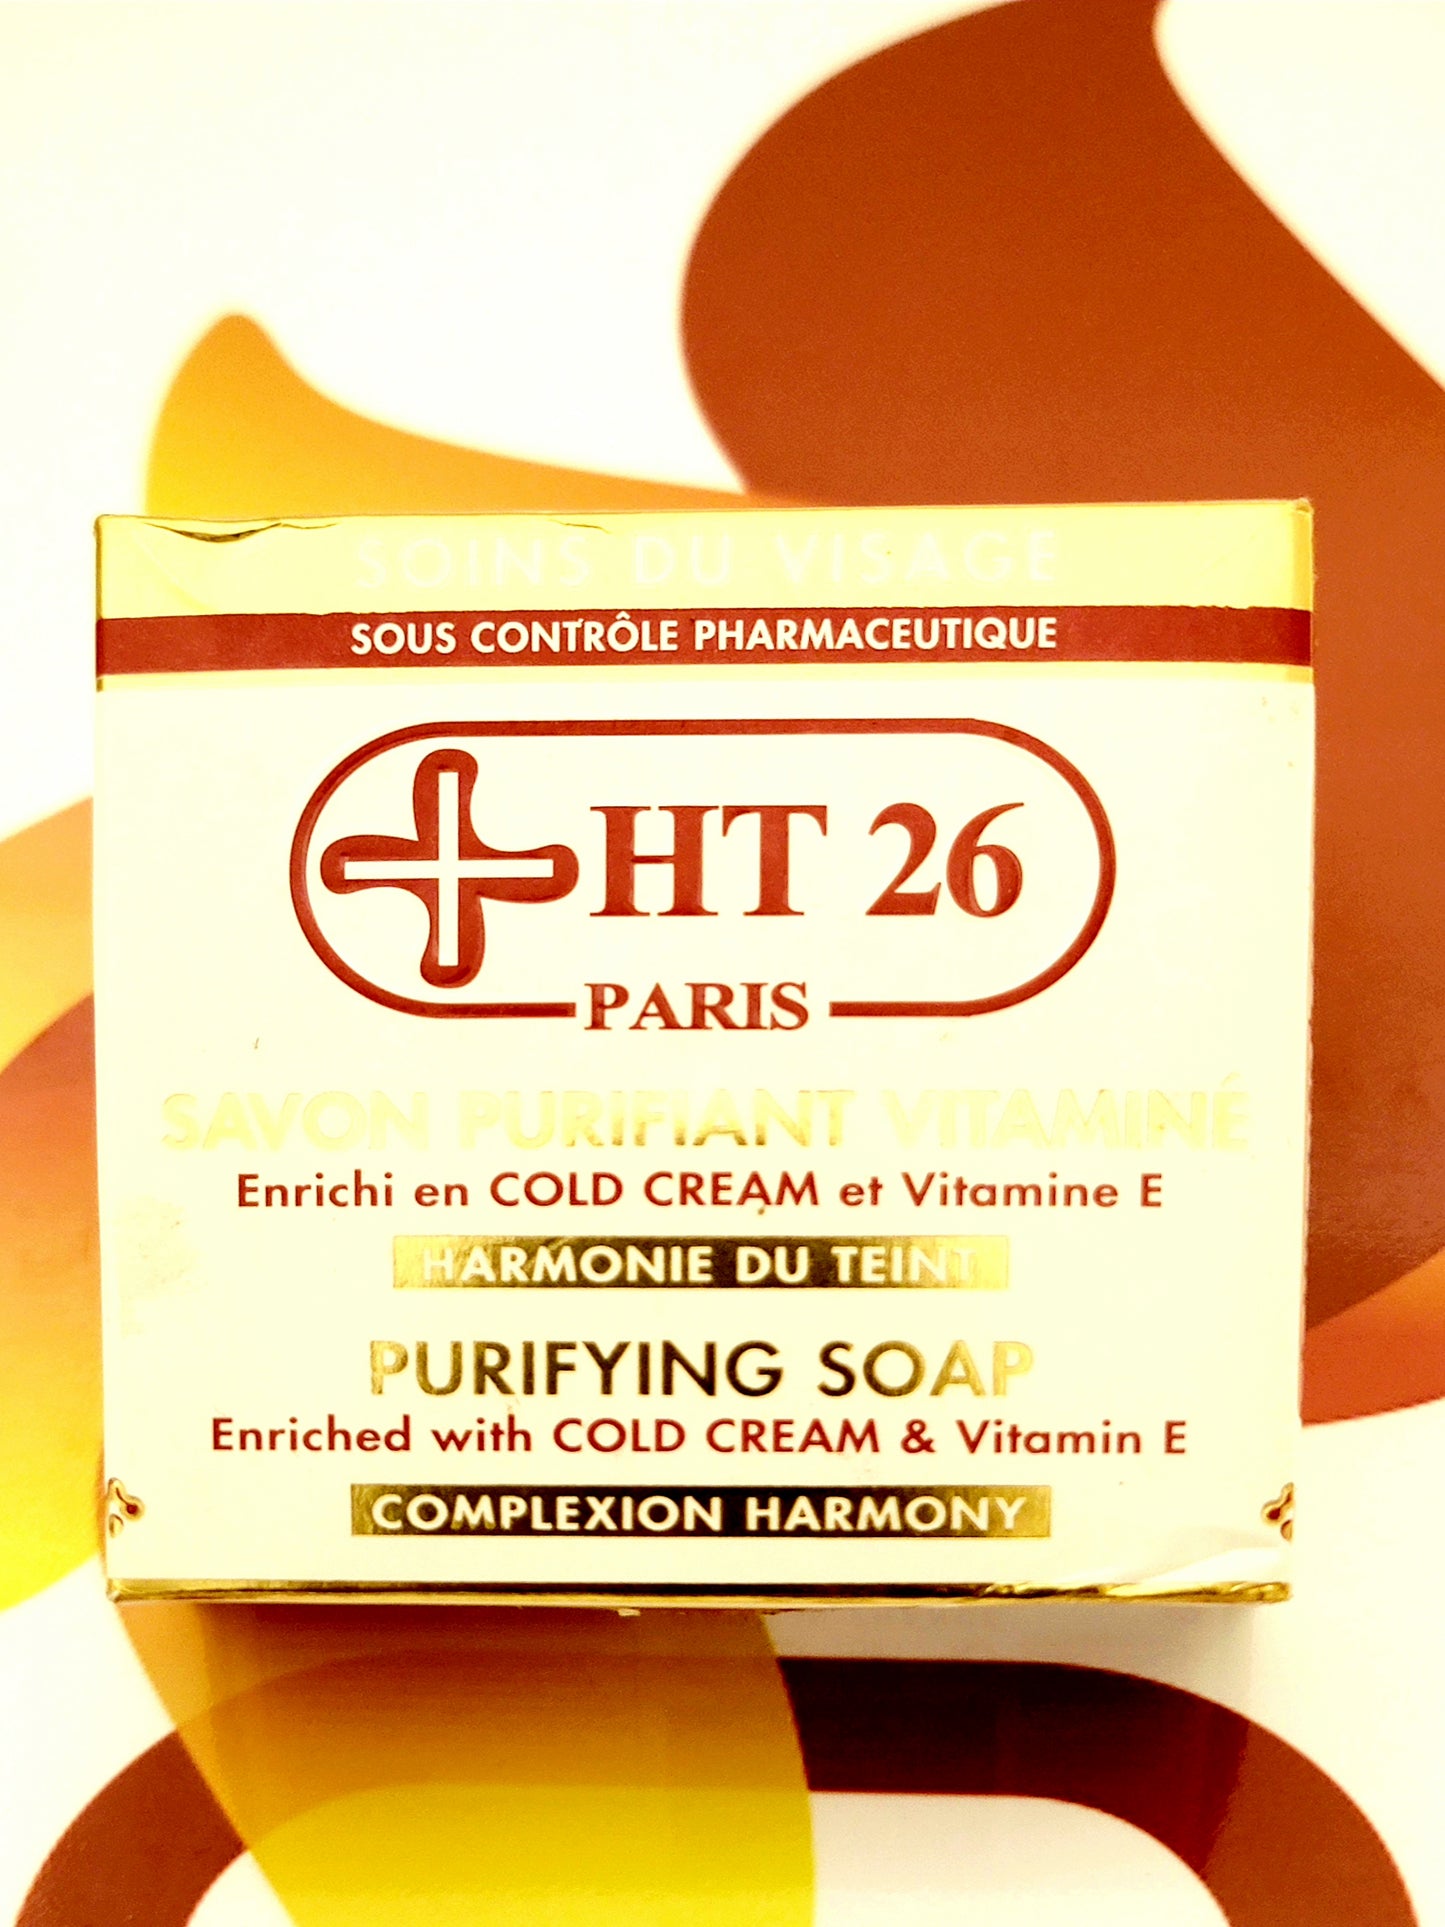 +HT26 Paris Purifying Cleansing Soap Complexion Harmony 150g